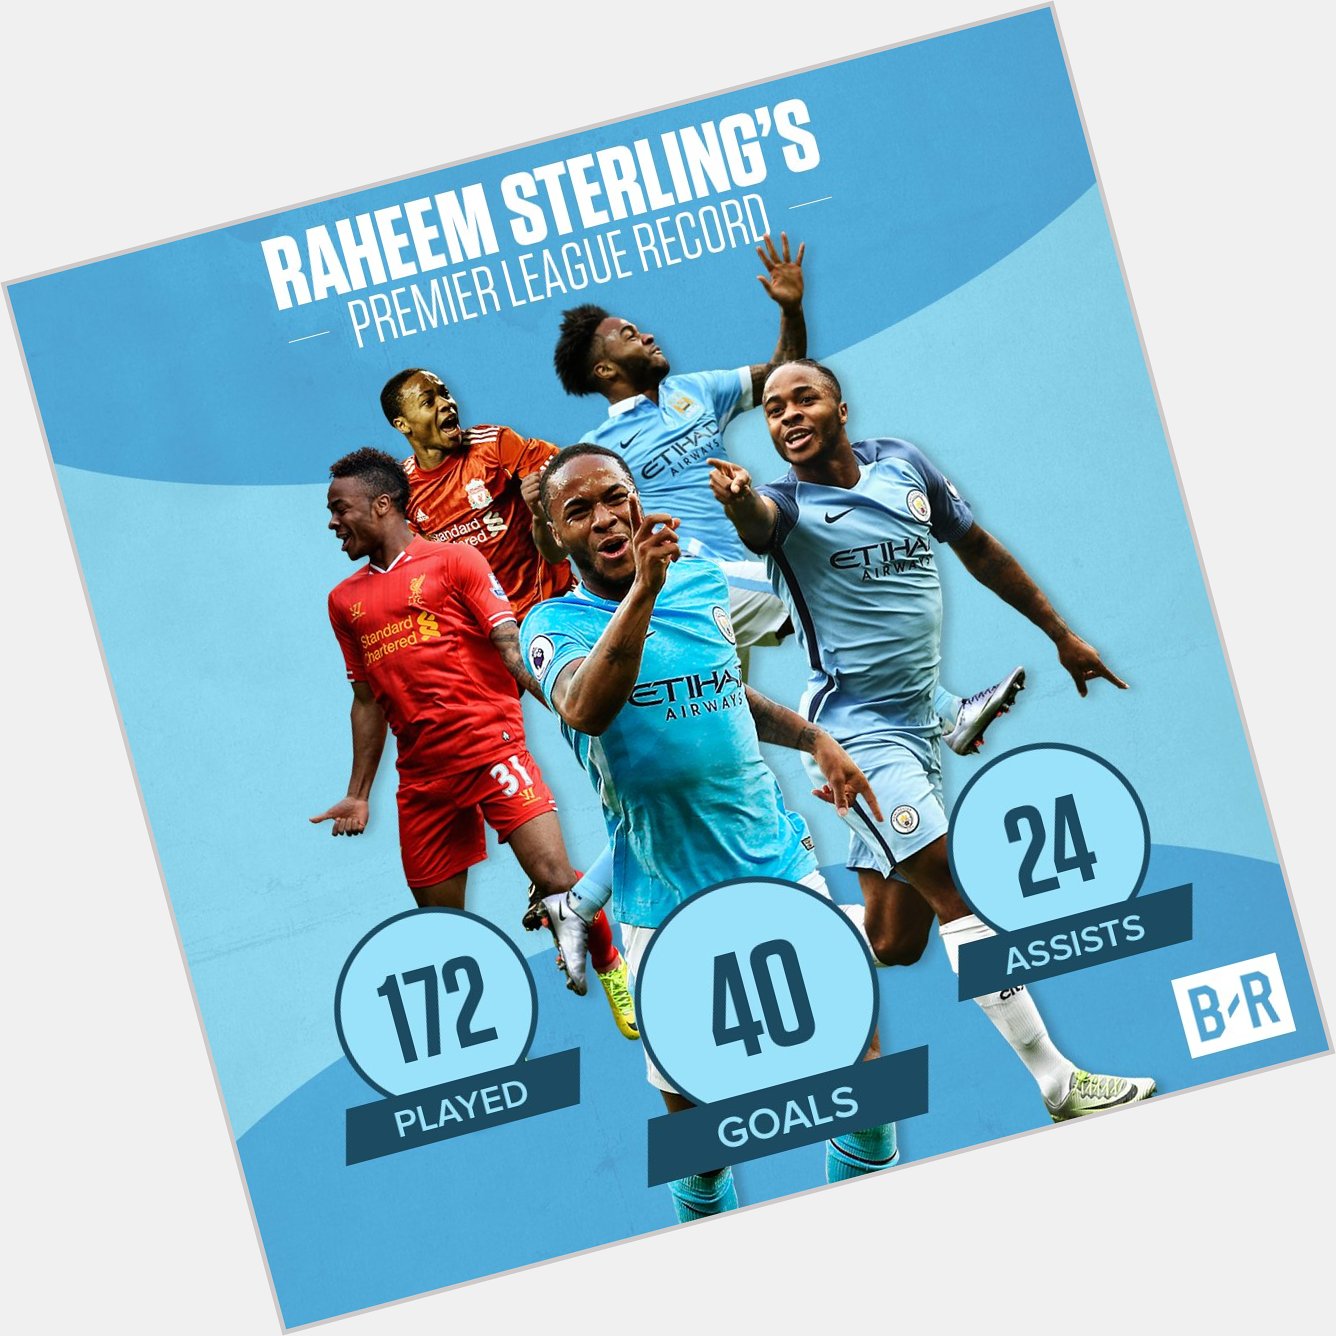 Happy Birthday Raheem Sterling. Only 23 and already a Premier League institution 